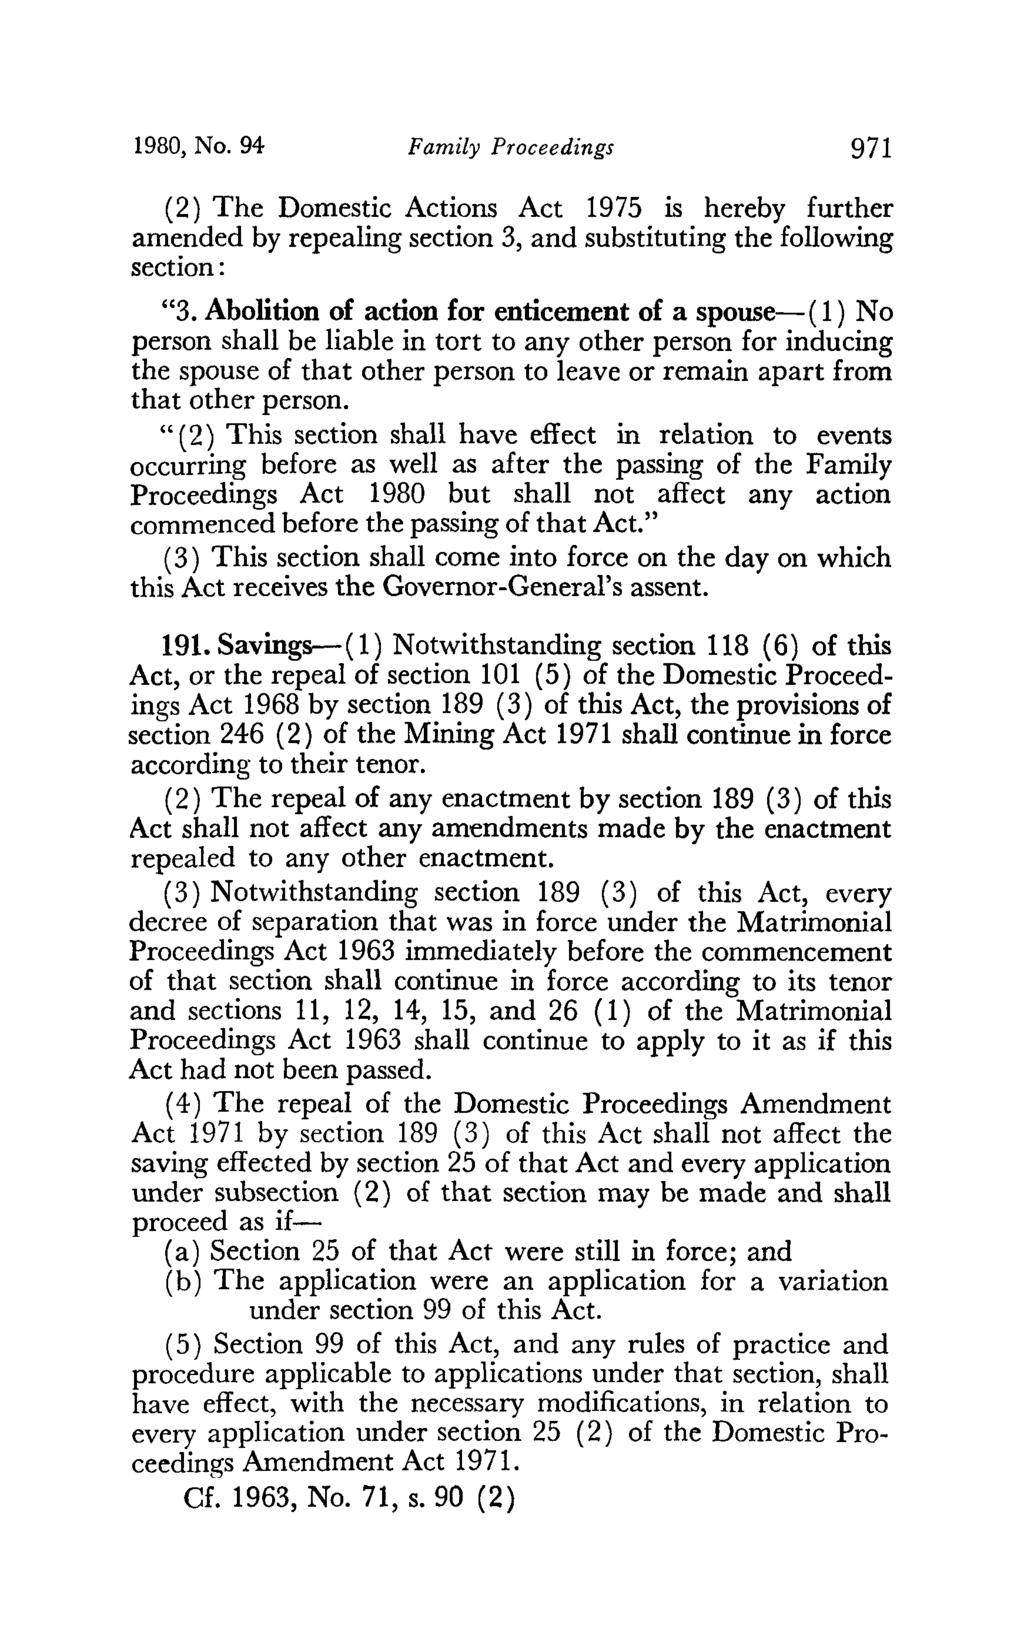 1980, No. 94 Family Proceedings 971 (2) The Domestic Actions Act 1975 is hereby further amended by repealing section 3, and substituting the following section: "3.